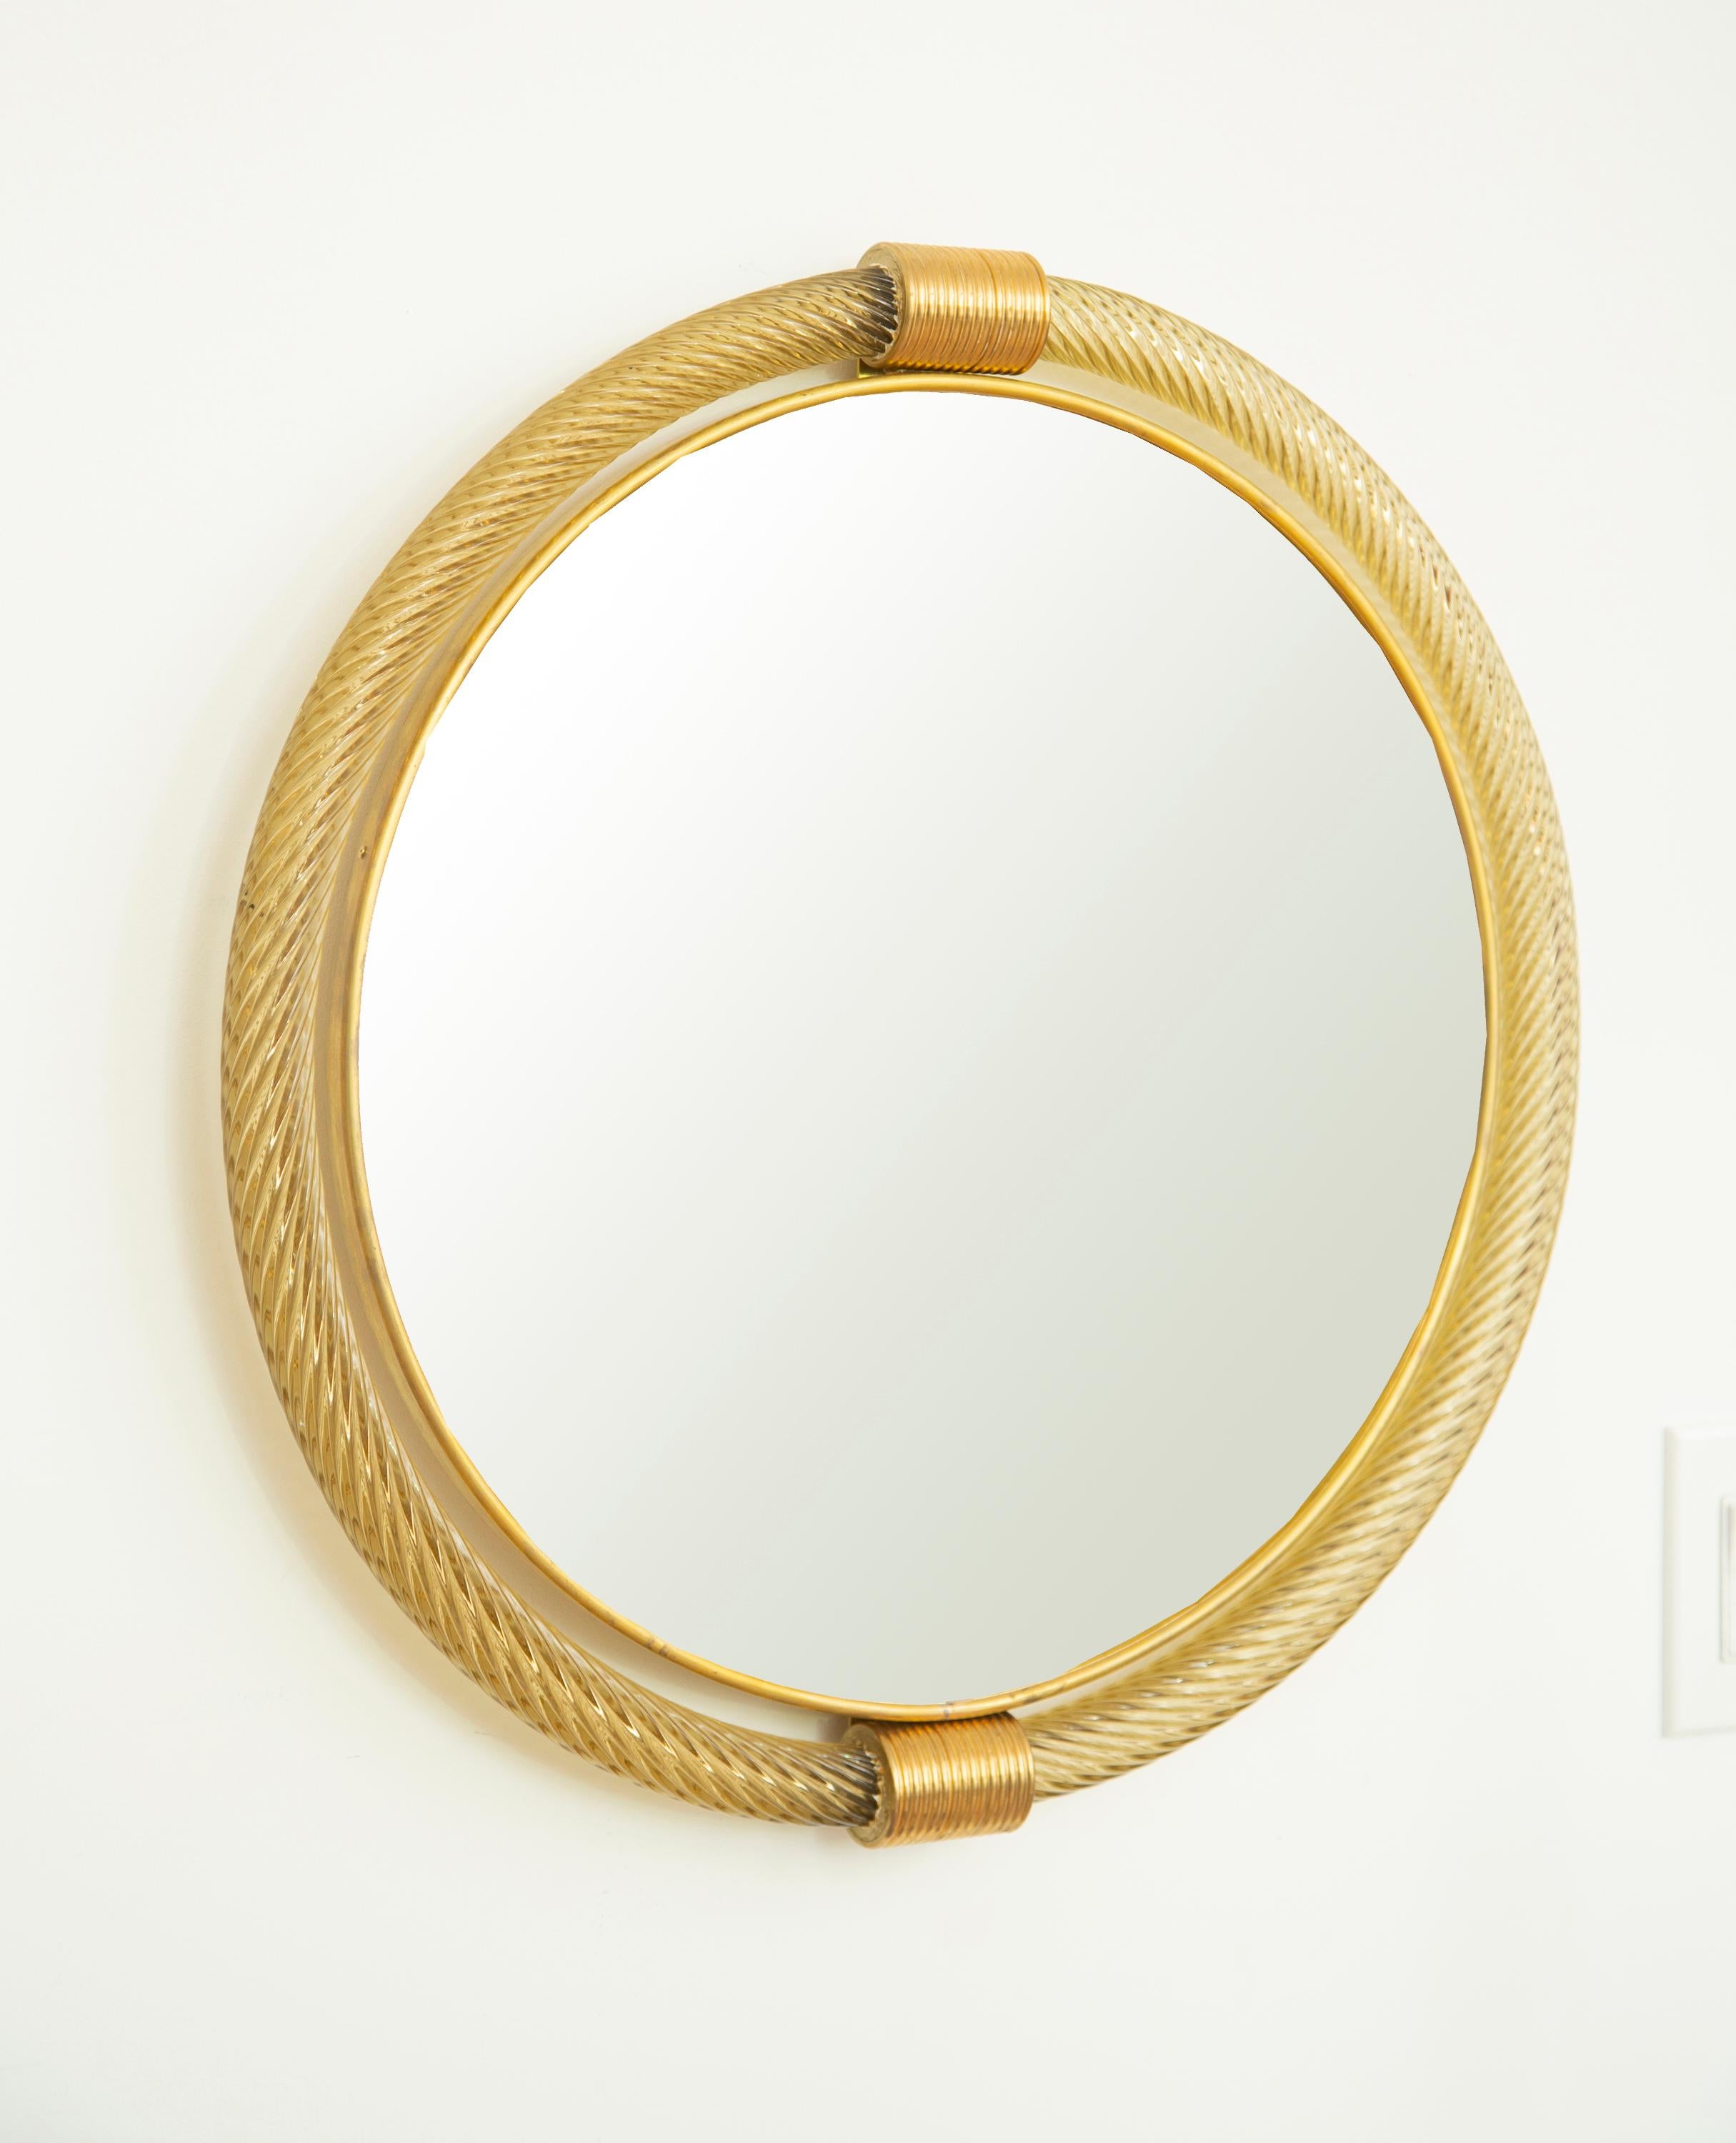 Round amber twisted rope hand blown murano glass mirror, in stock
2 available!
Amber Murano hand blown glass.
Brass fittings and a thin inner brass gallery.
See other colors from our collection.
Located in our store in Miami ready for shipping.